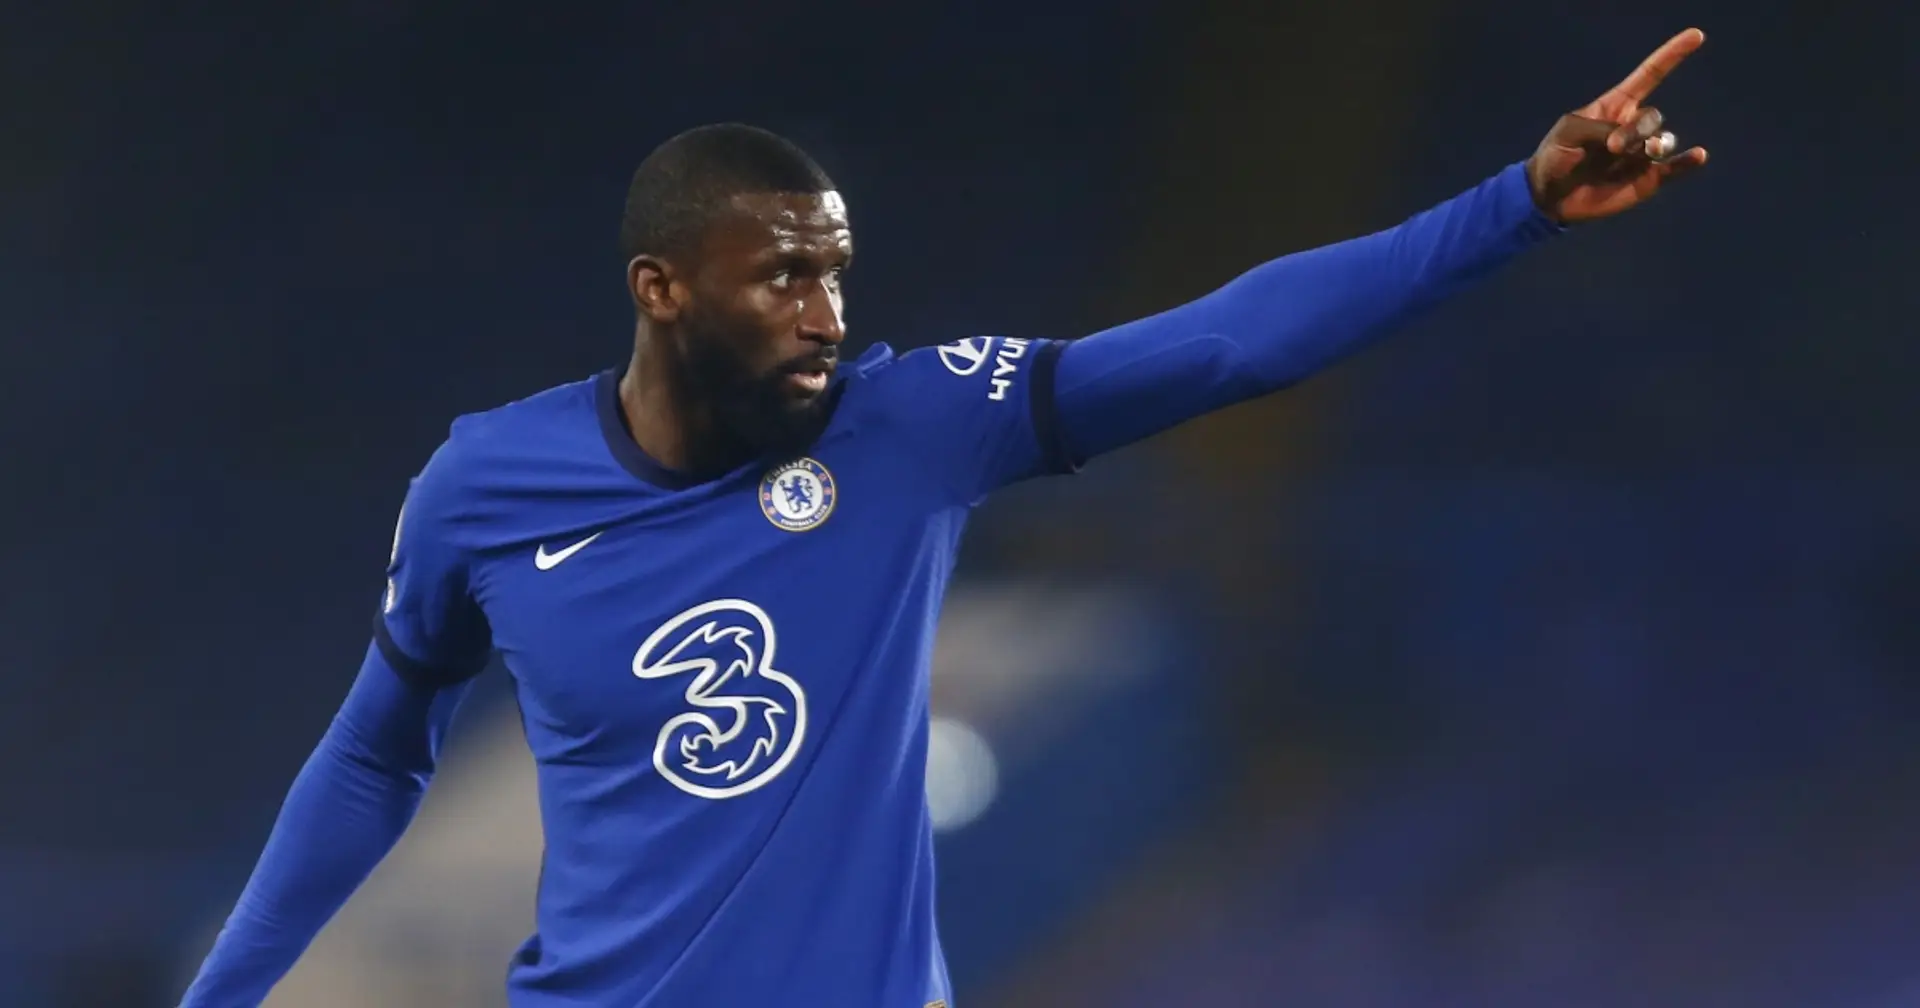 New contract for Rudiger & 3 more big Chelsea stories you might've missed